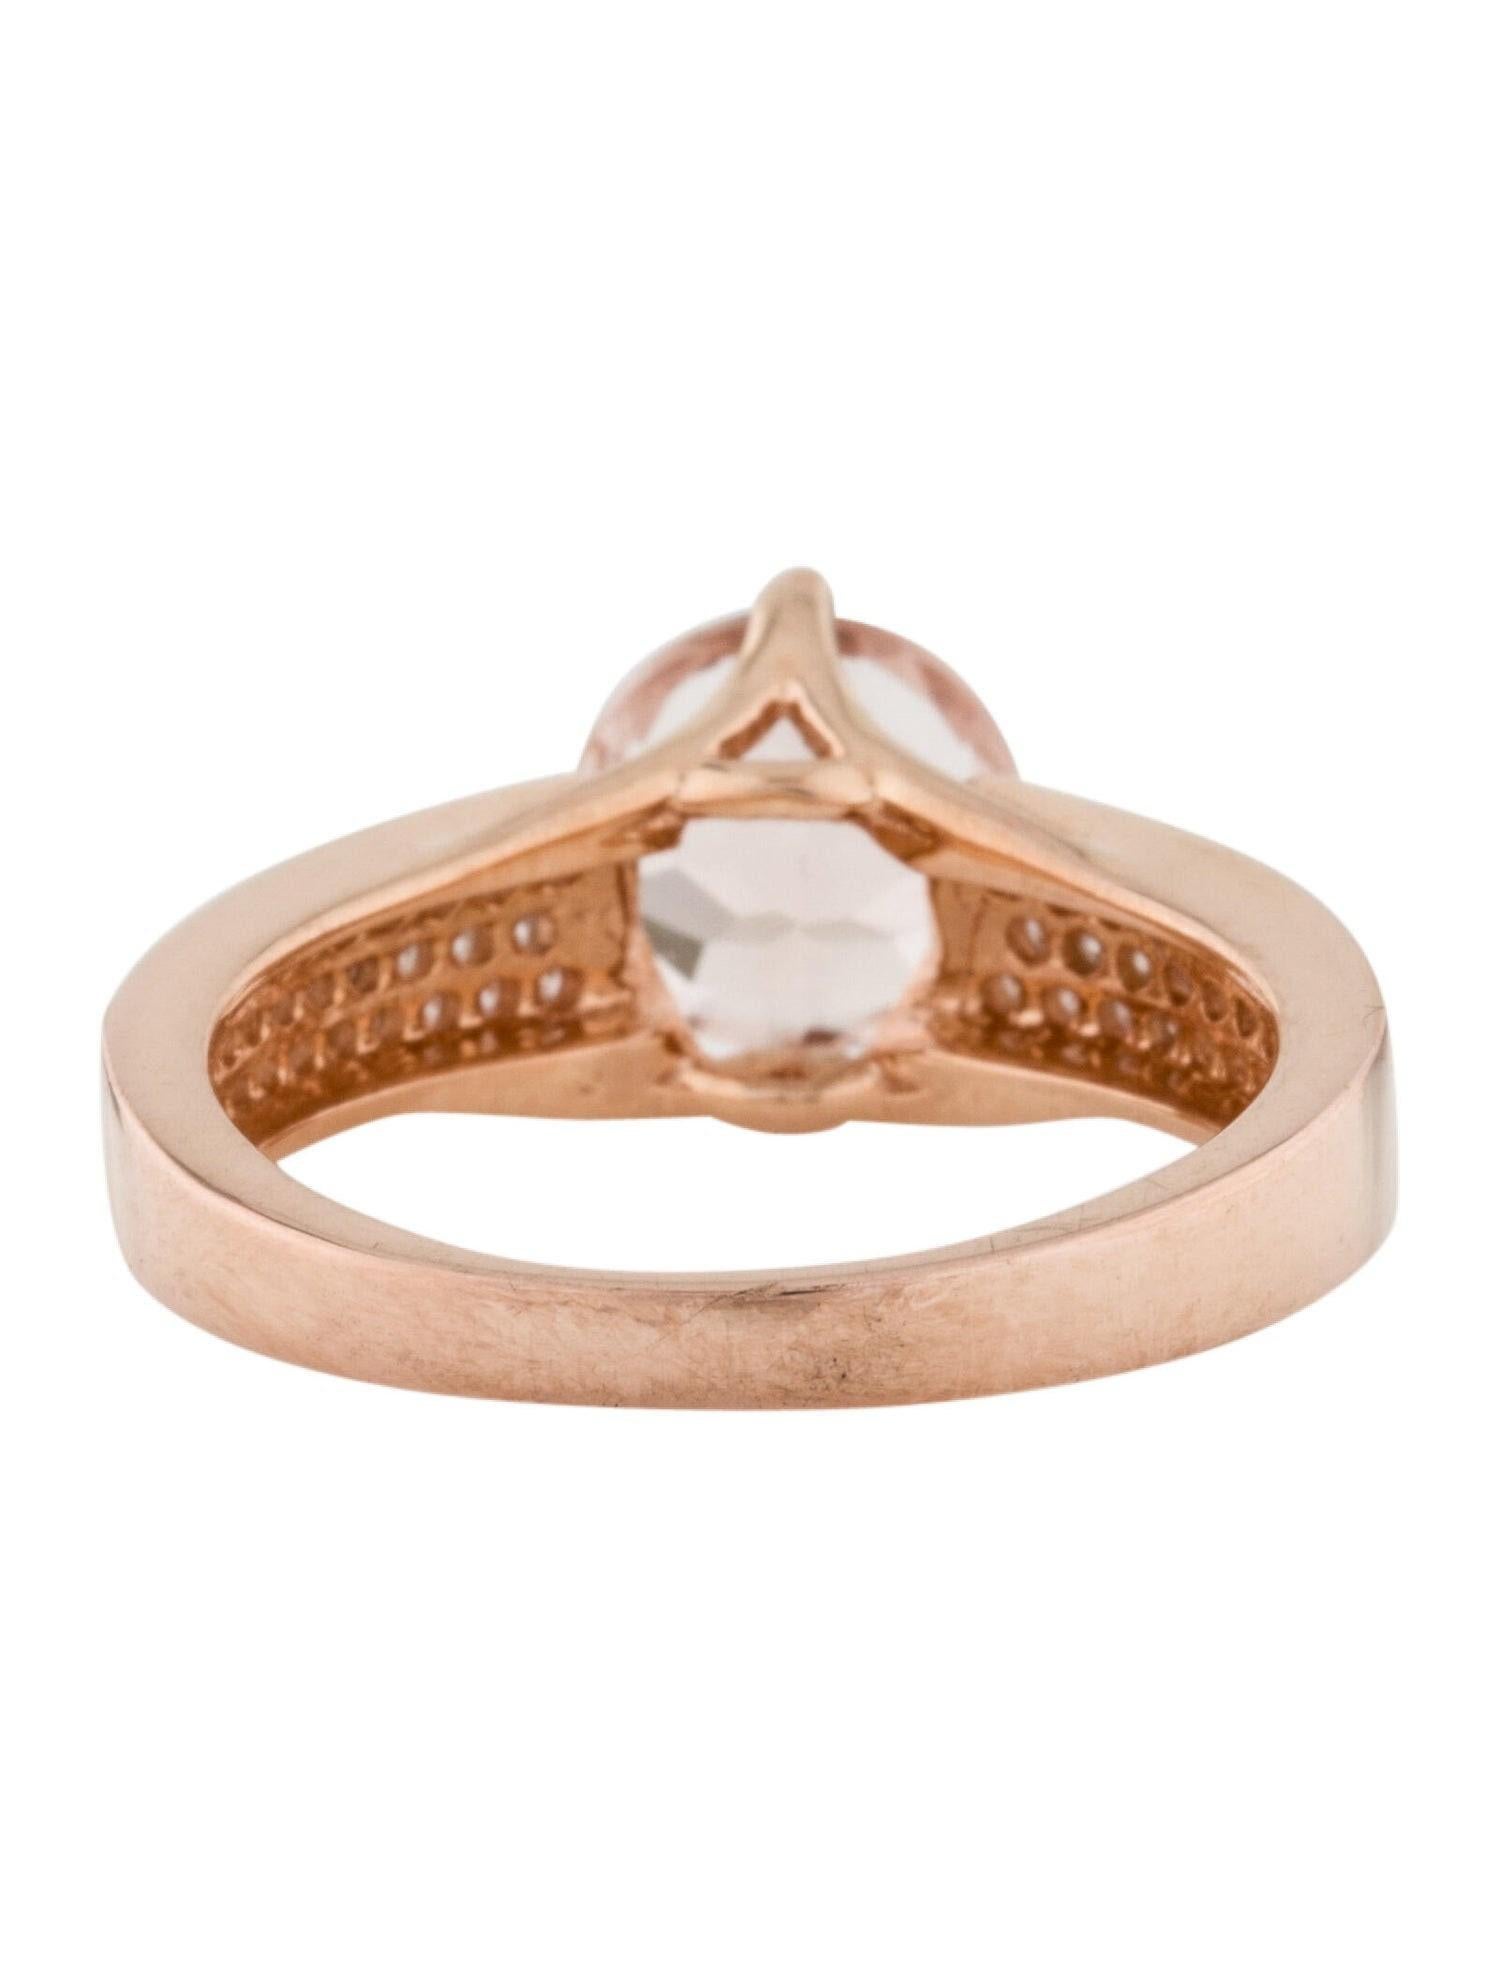 This is a gorgeous natural 1.77 morganite and diamond ring set in solid 14k rose gold. The natural round cut morganite (AAA quality gem) has an excellent peachy pink color and is surrounded by a halo of round-cut white diamonds. The ring is stamped